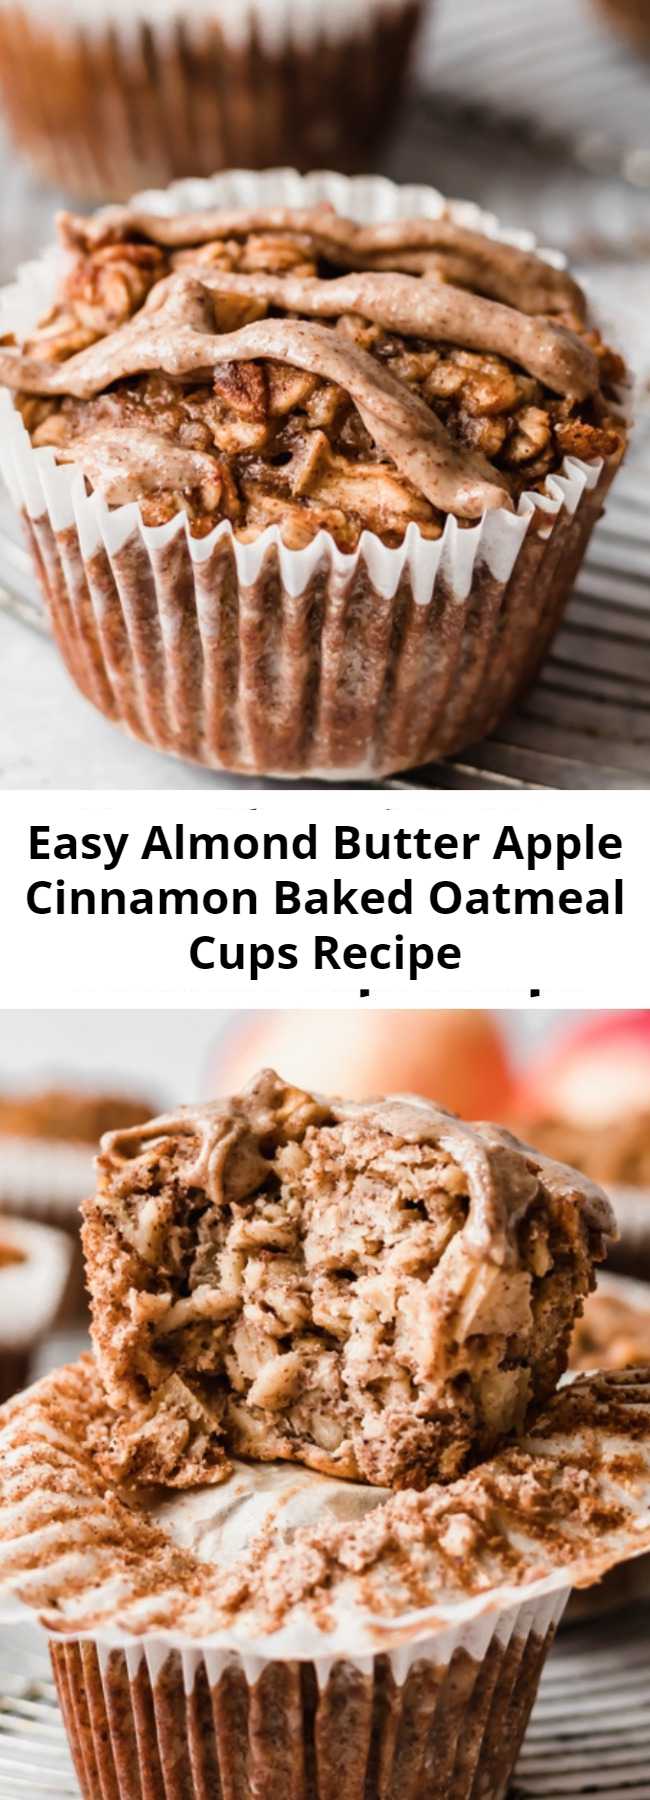 Almond Butter Apple Cinnamon Baked Oatmeal Cups Recipe - Easy apple cinnamon baked oatmeal cups made with applesauce, fresh apples, oats, maple syrup and almond butter for a boost of protein + flavor. Freezer-friendly, great for kids or meal prep! #mealprep #freezerfriendly #oatmeal #oatmealcups #almondbutter #applerecipe #apples #kidfriendly #glutenfree